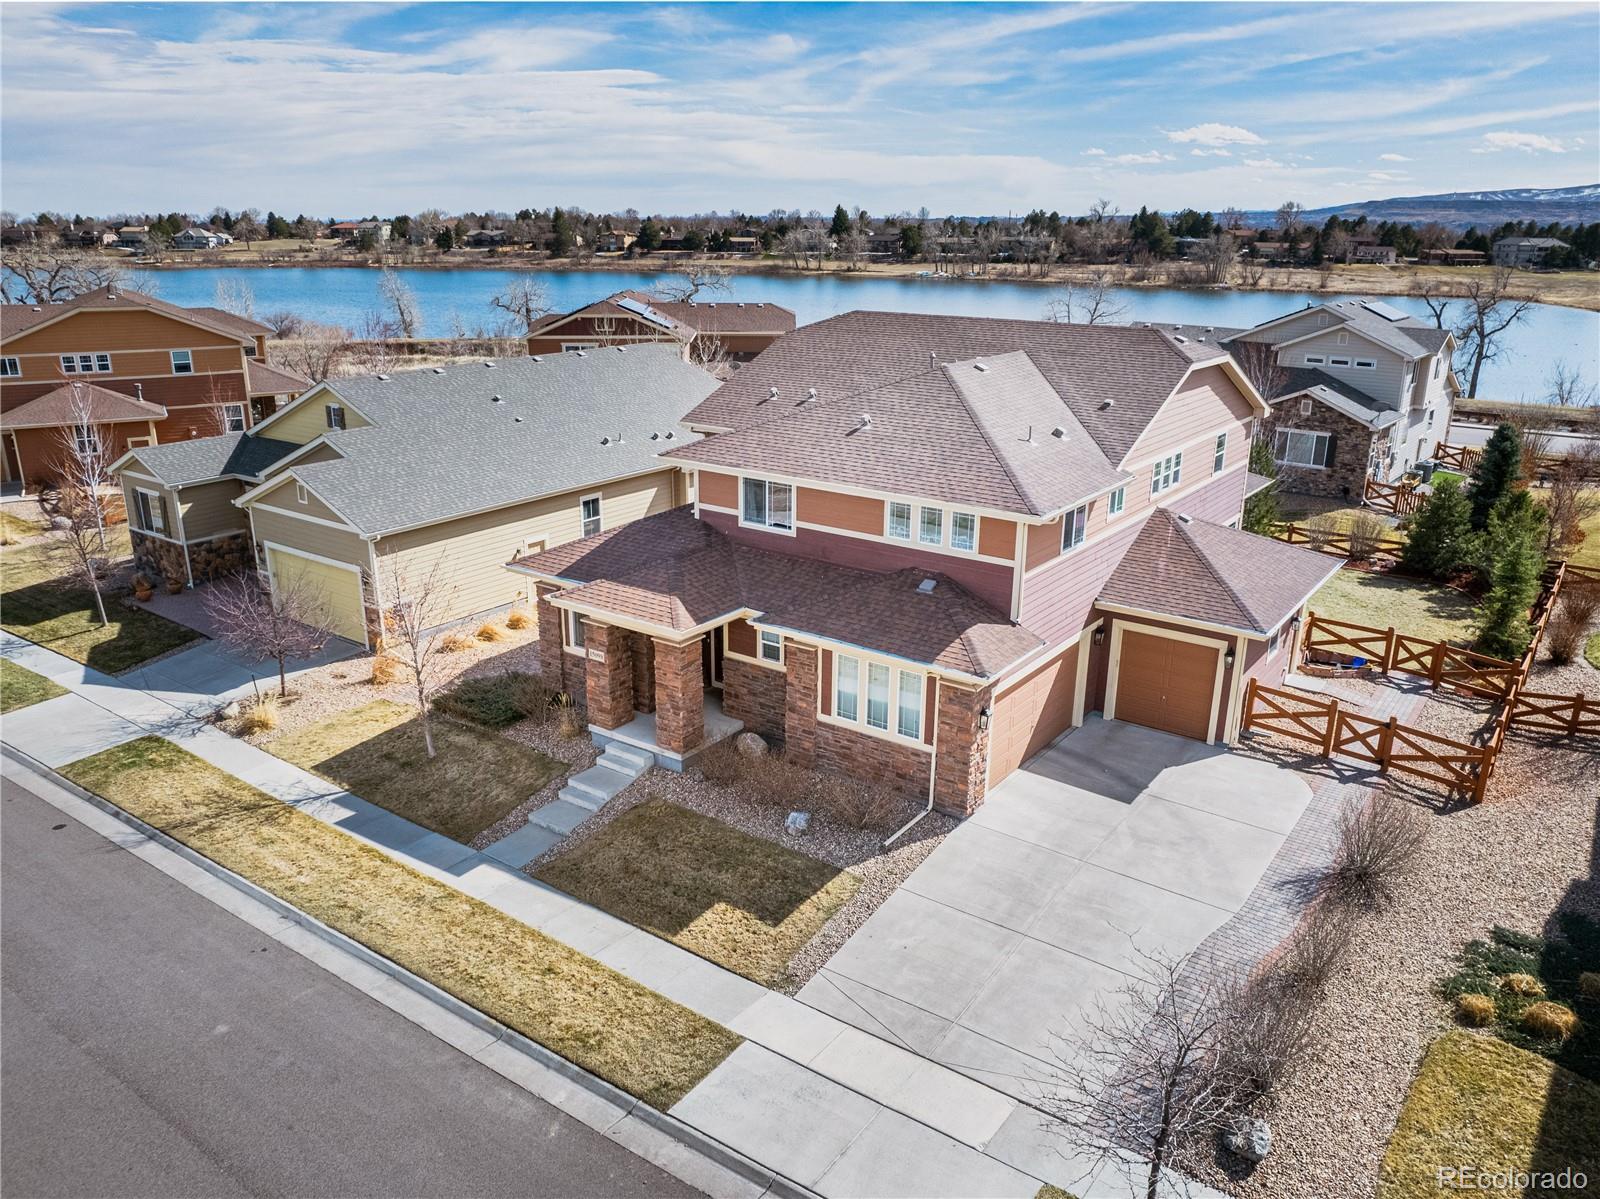 Report Image for 15098 W 63rd Lane,Arvada, Colorado